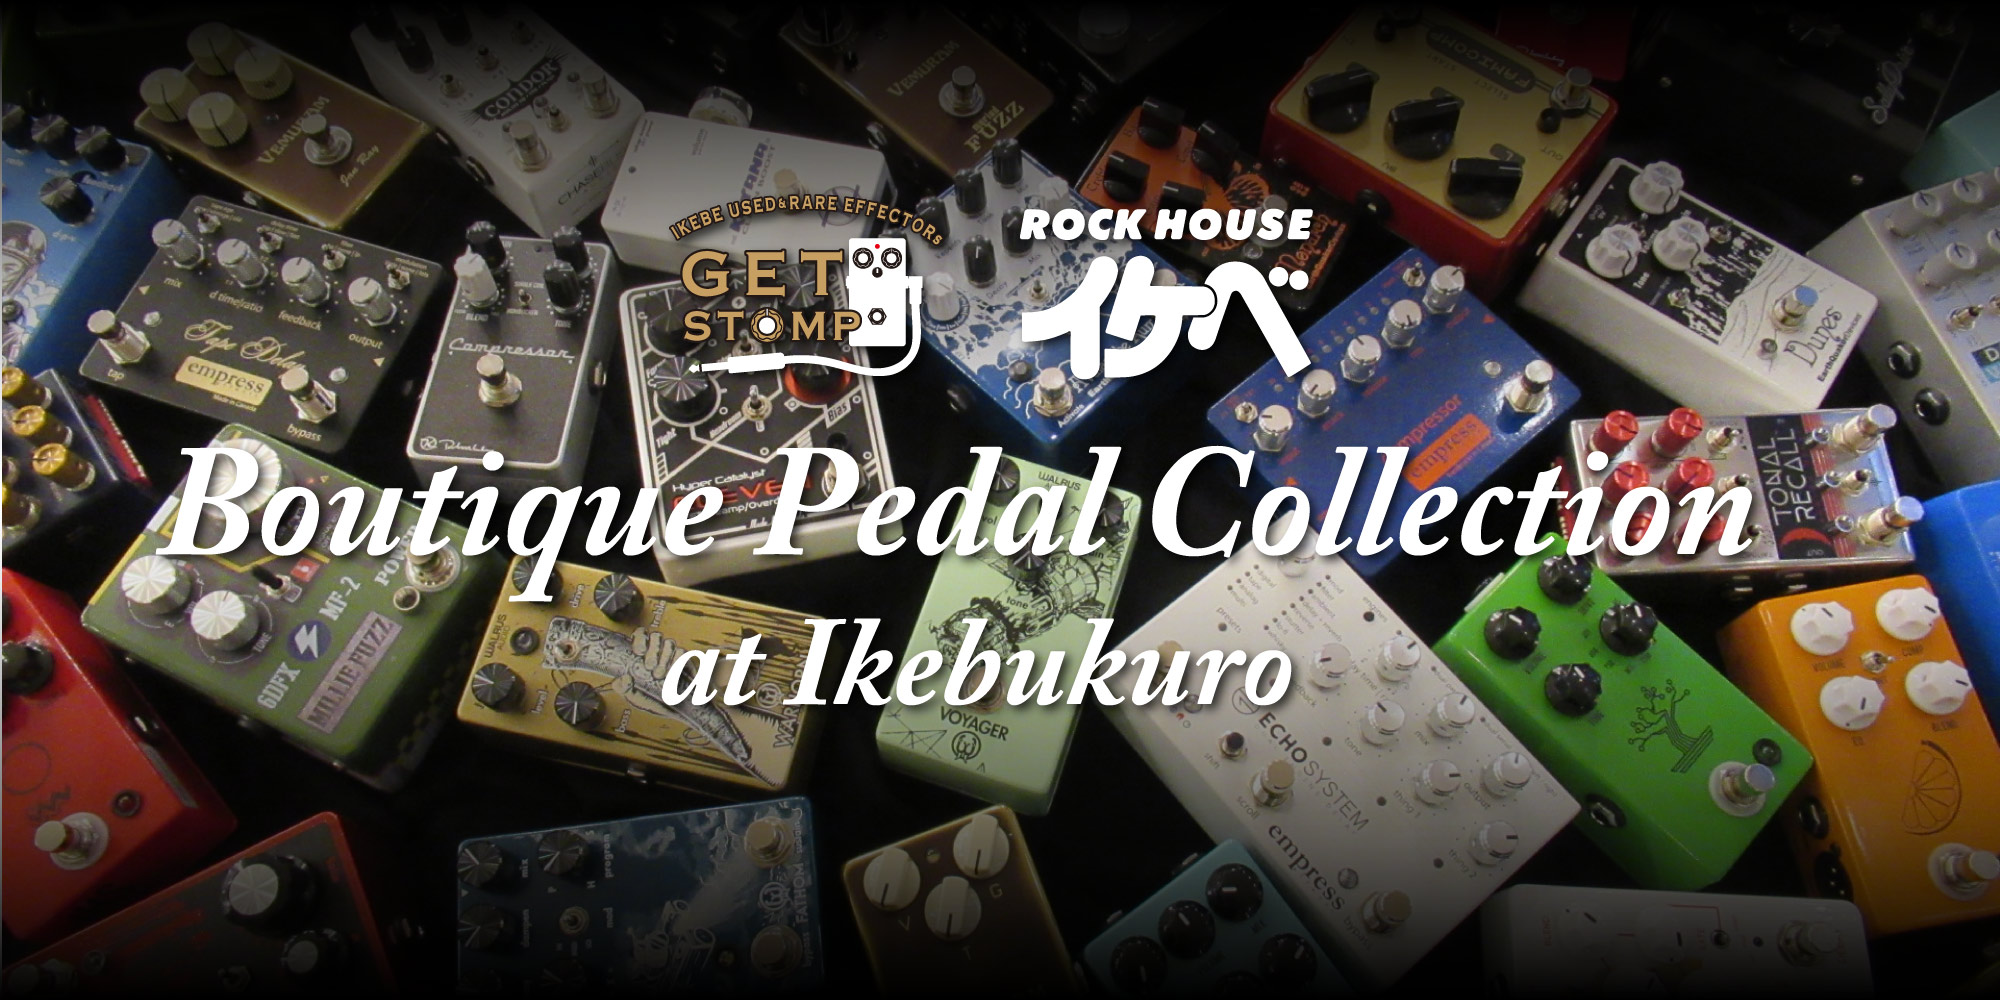 【Boutique Pedal Collection at Ikebukuro】